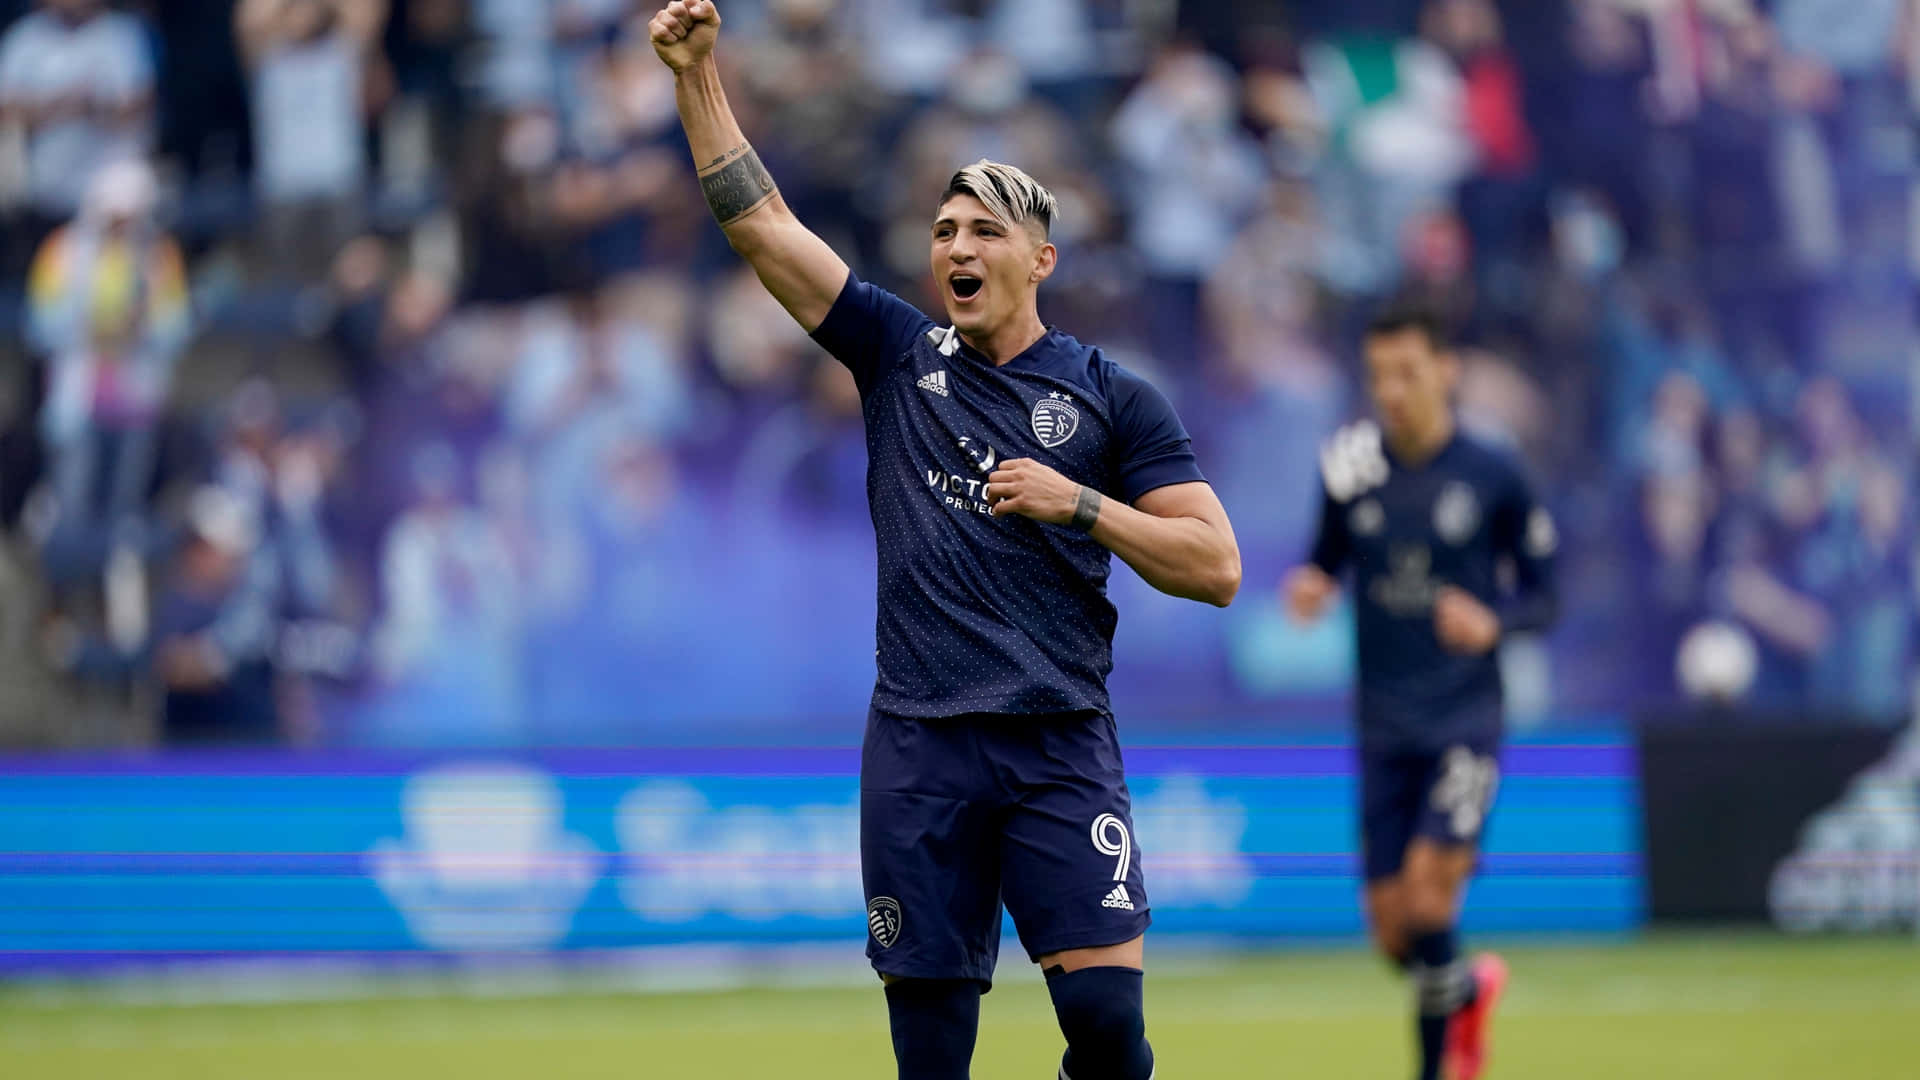 Alan Pulido Celebrating With Fist Up Wallpaper